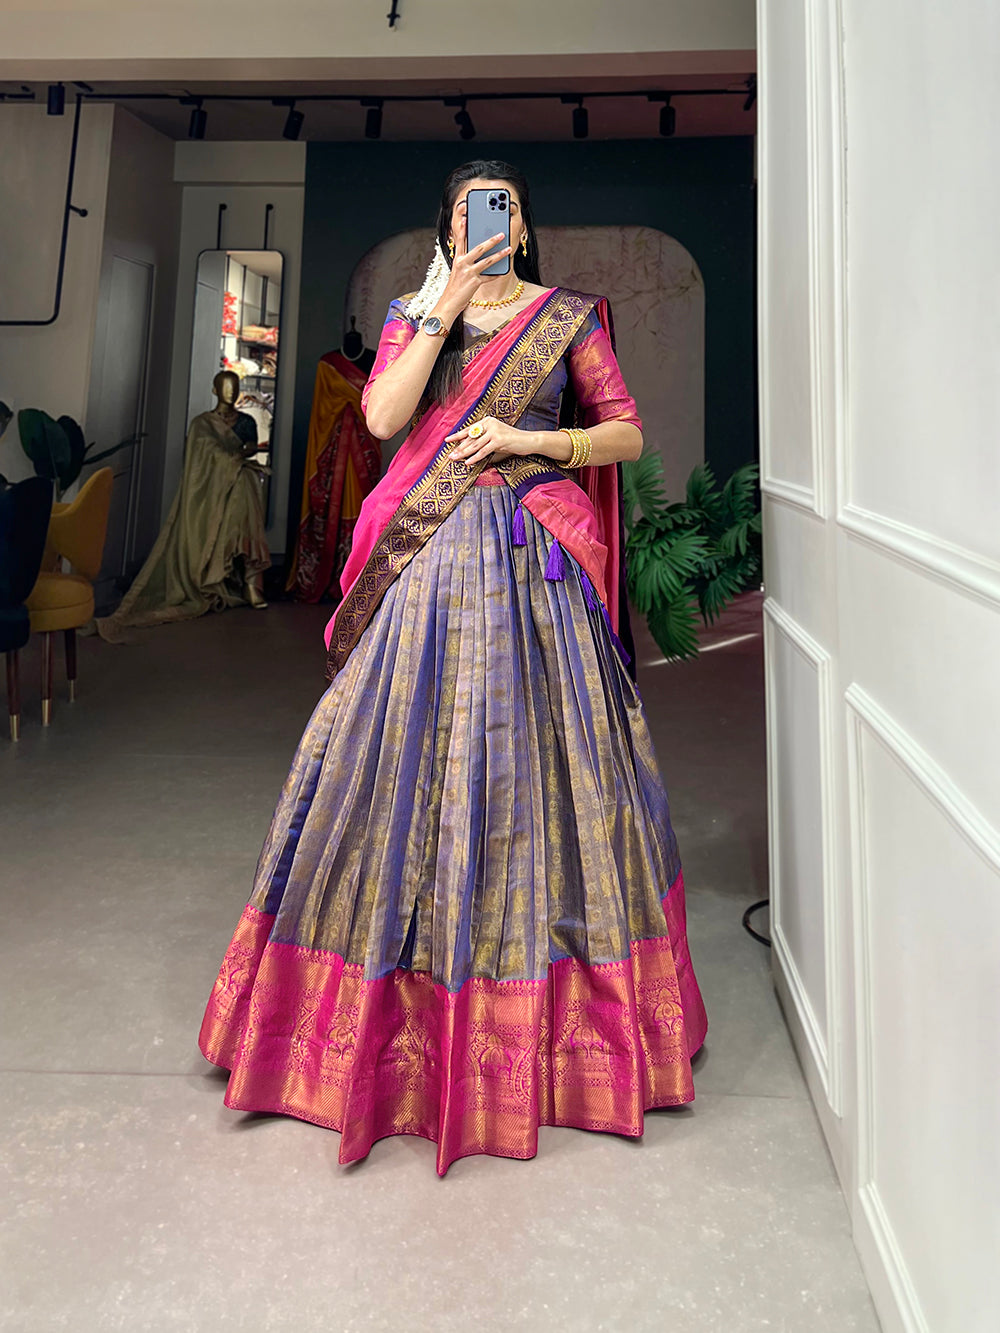 The Most Gorgeous South Indian Lehenga Saree Designs We Spotted! | Saree  designs, Party wear indian dresses, Lehenga saree design